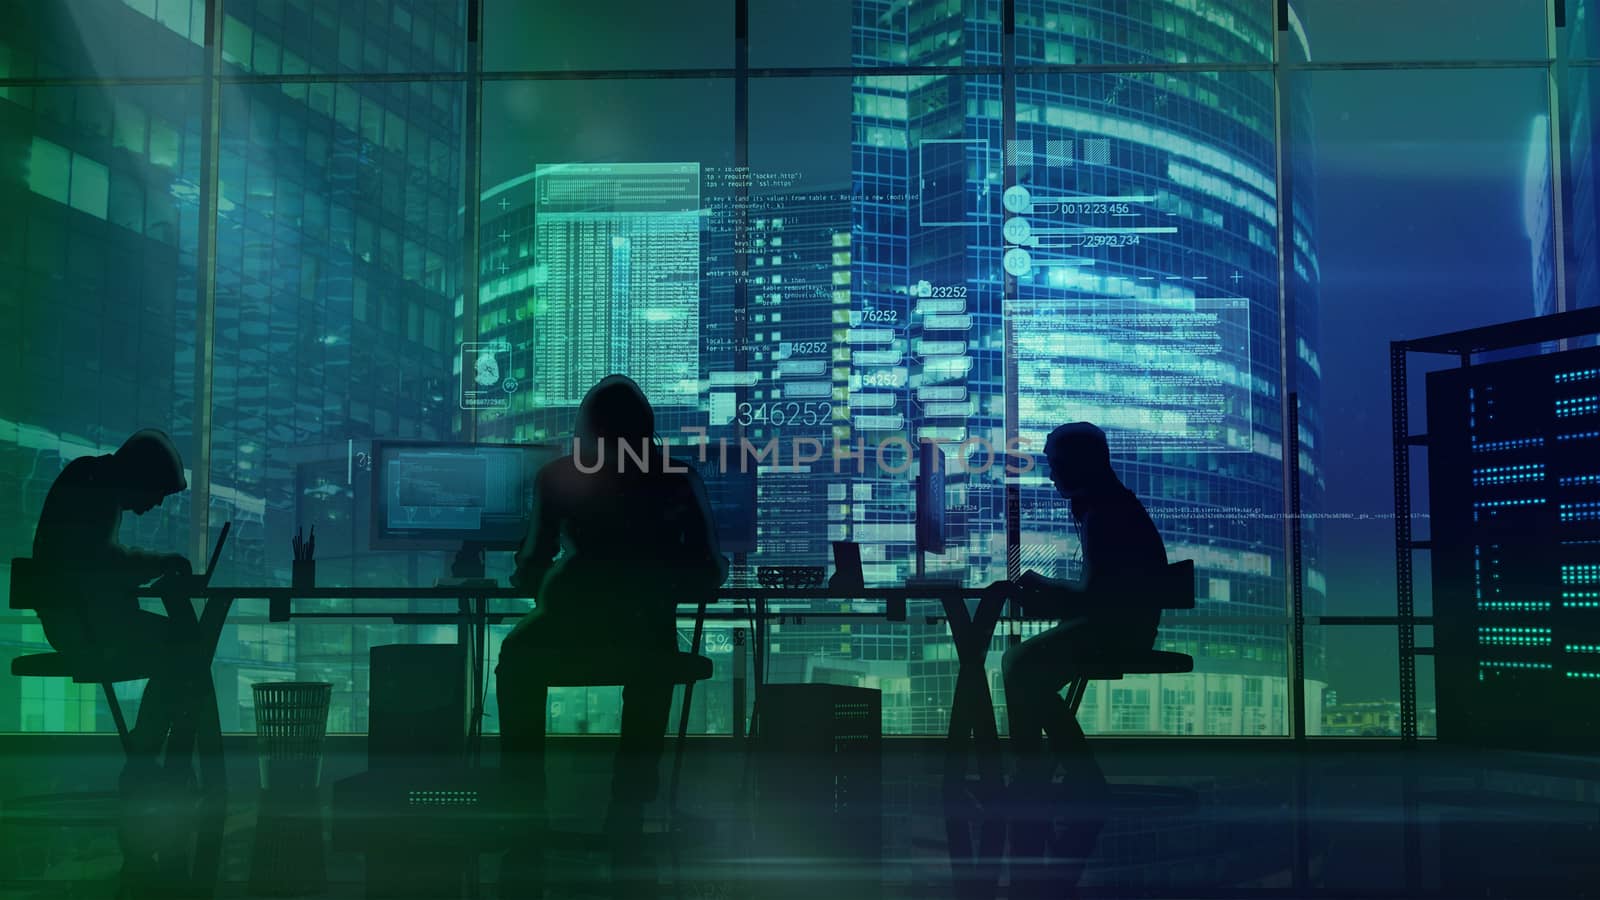 Silhouettes of several men working intensively behind their computers against the background of glass office skyscrapers.